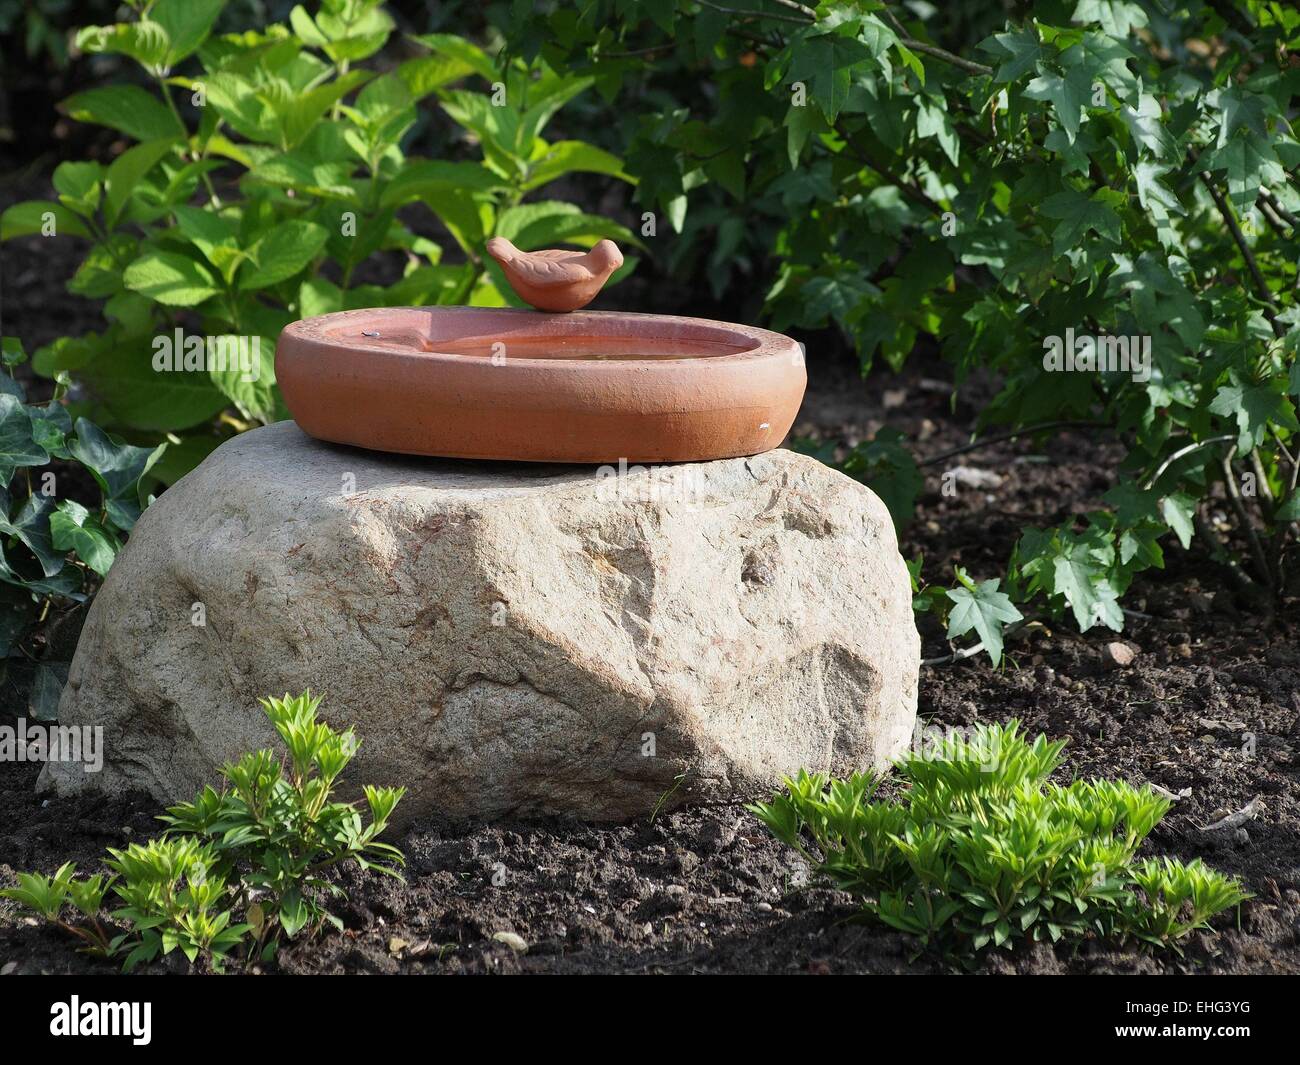 Ton Steine Garten High Resolution Stock Photography and Images - Alamy